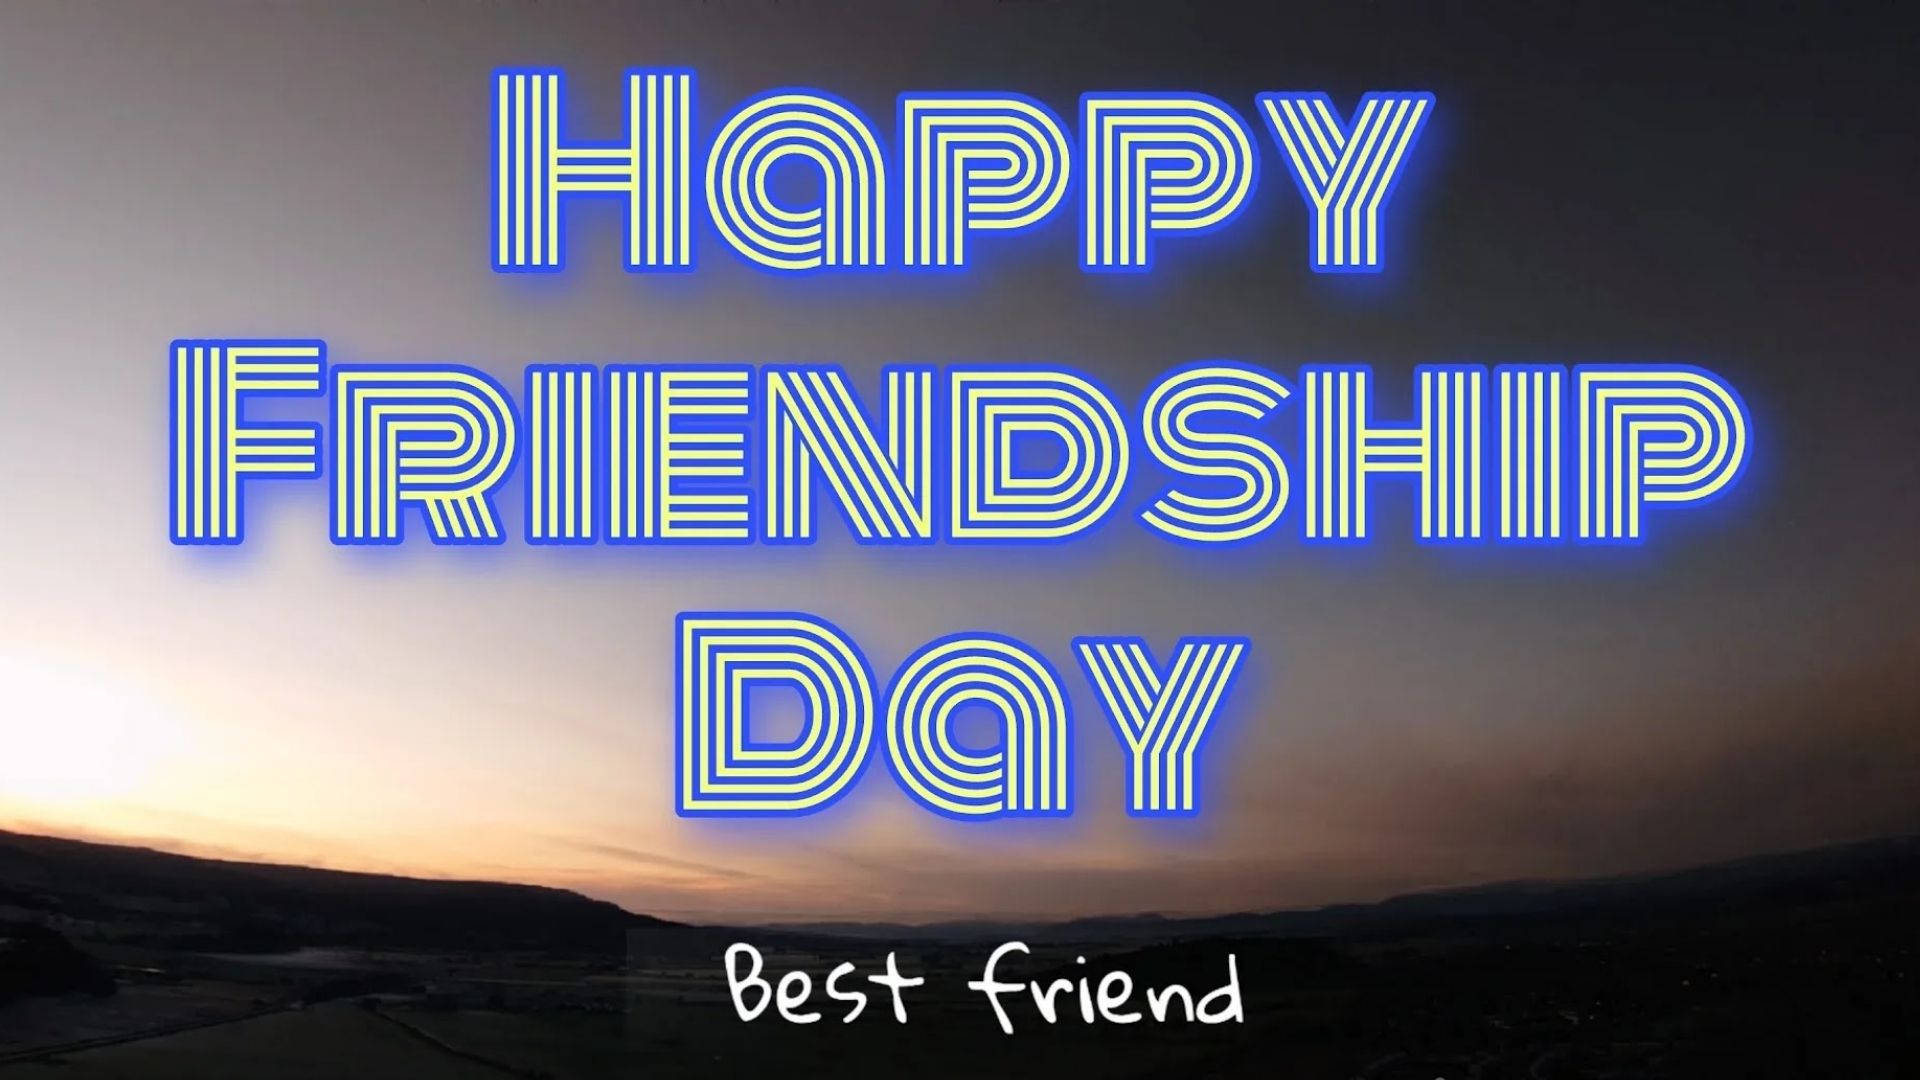 Friendship Day Greeting In The Sky